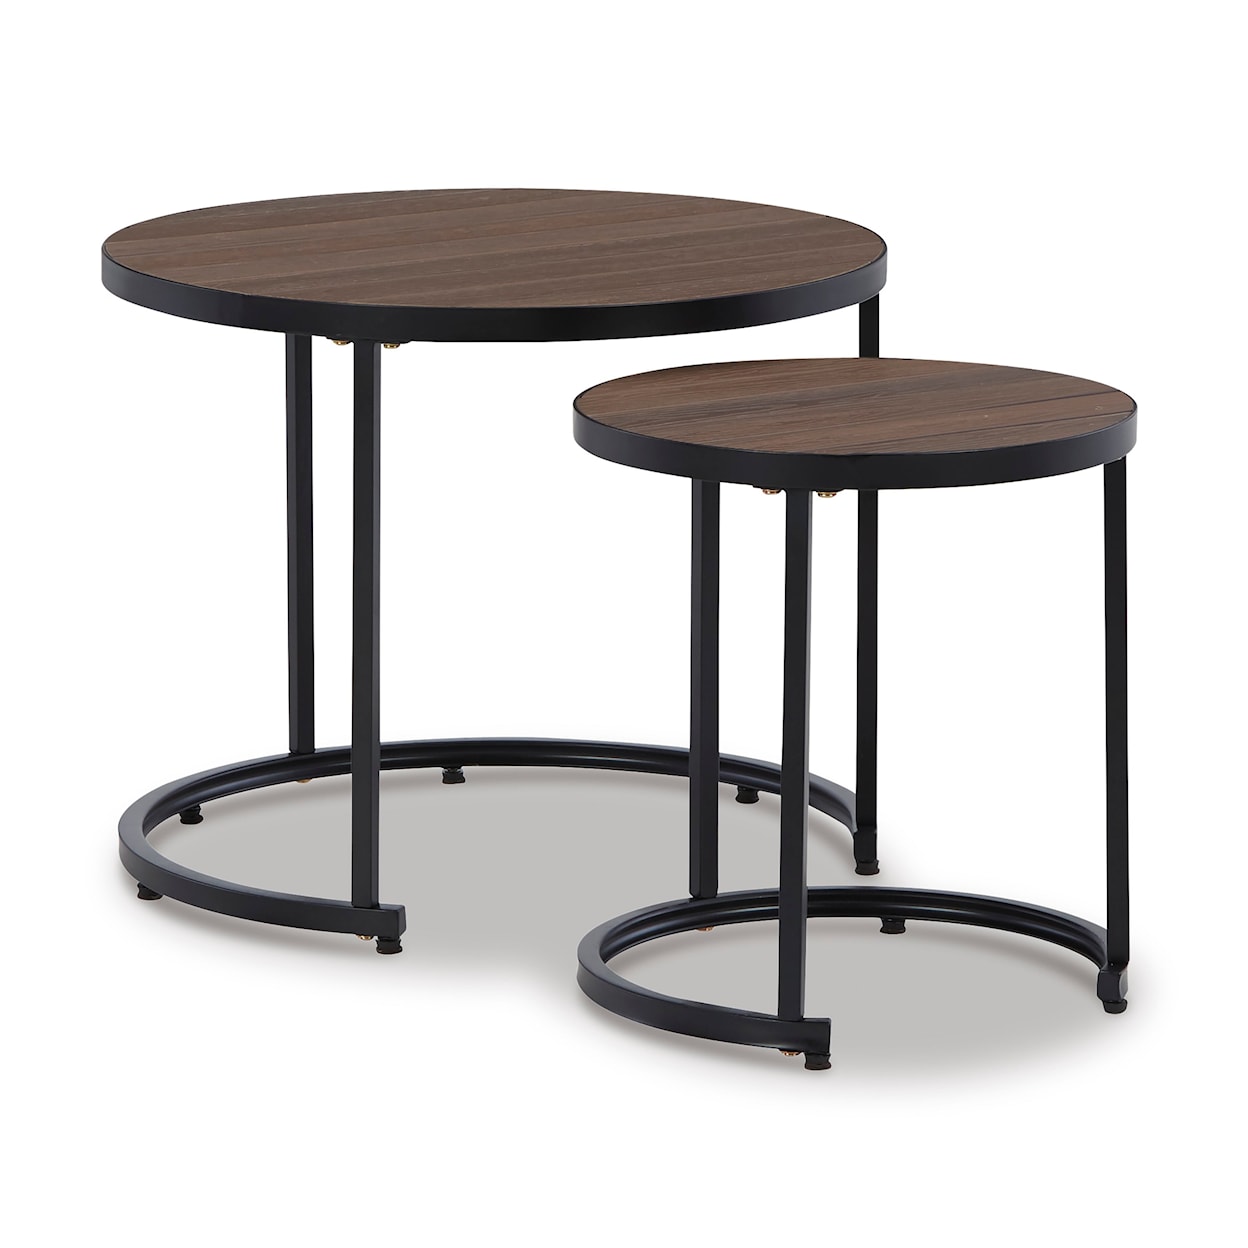 Signature Design by Ashley Ayla Outdoor Nesting End Tables (Set of 2)